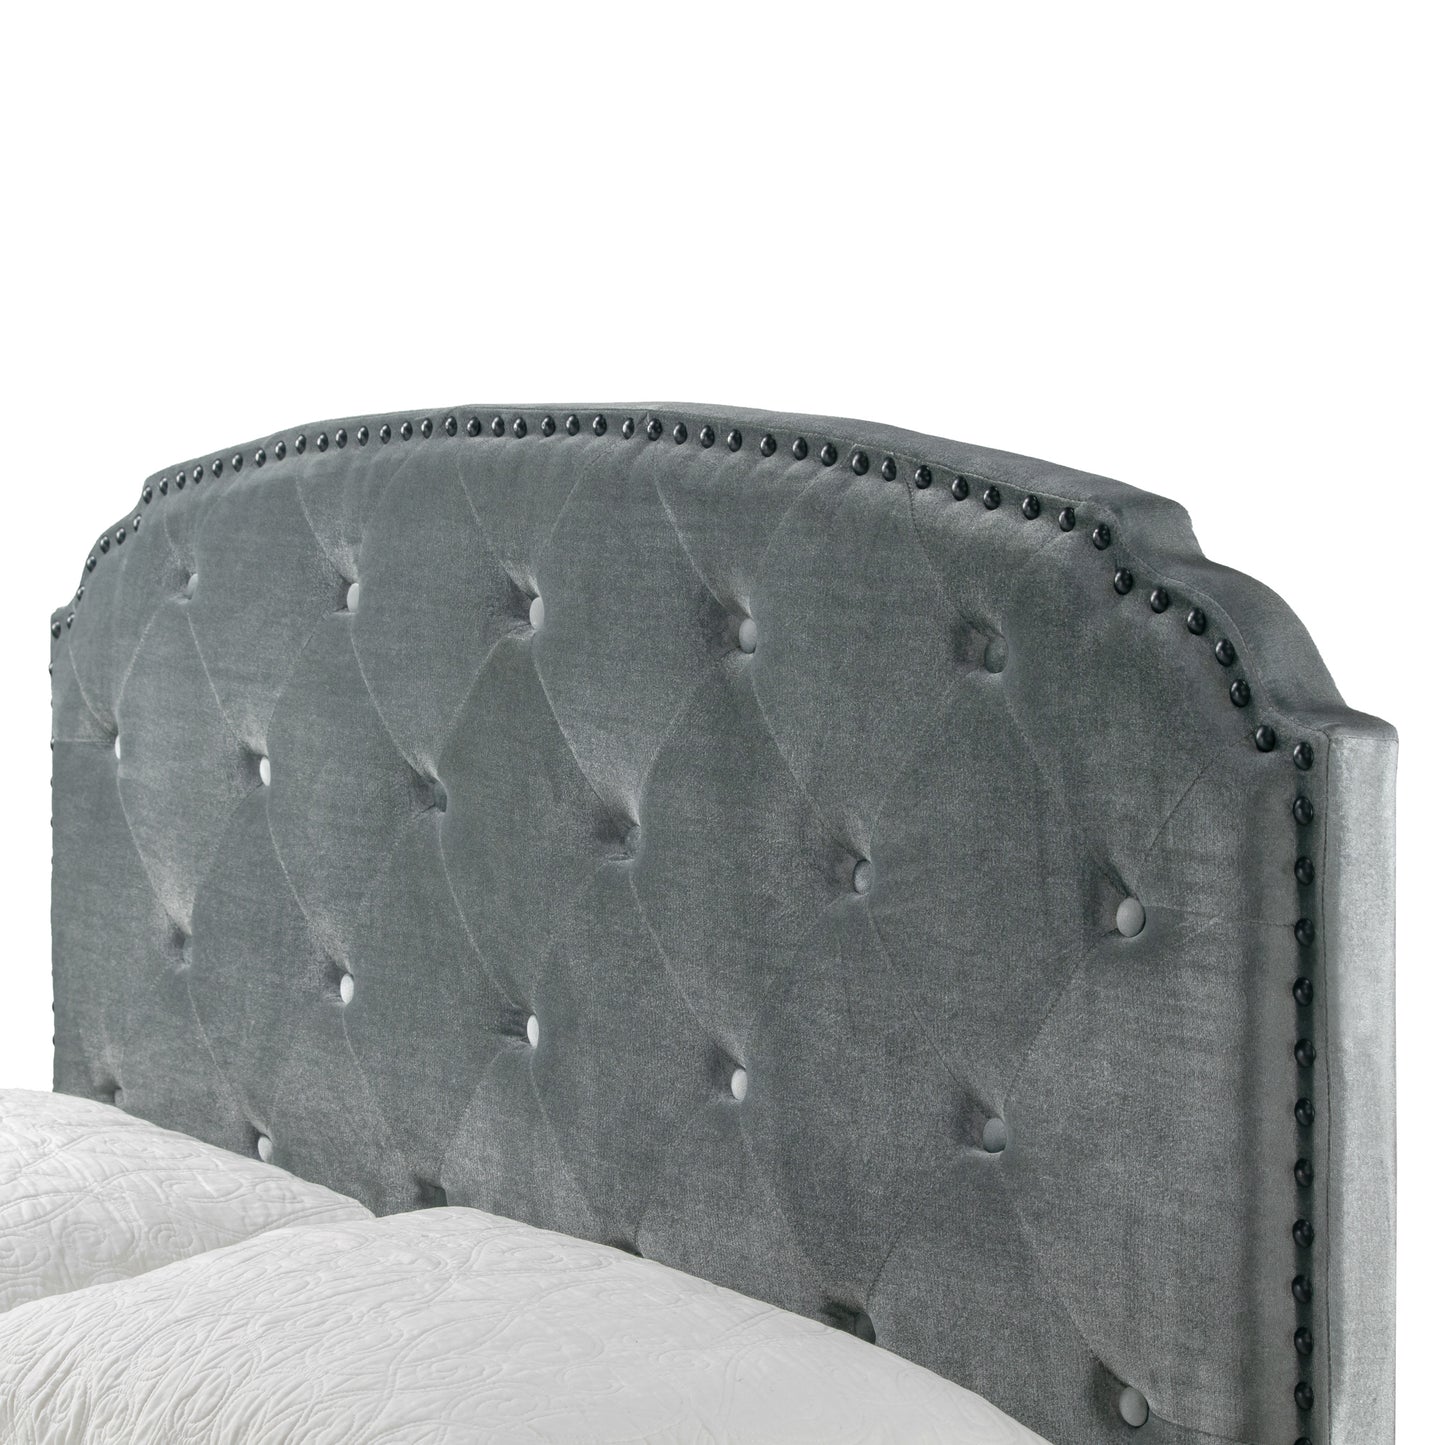 Arin Silver Grey Velvet Queen Bed with Button Tufting and Black Nail Head Trim